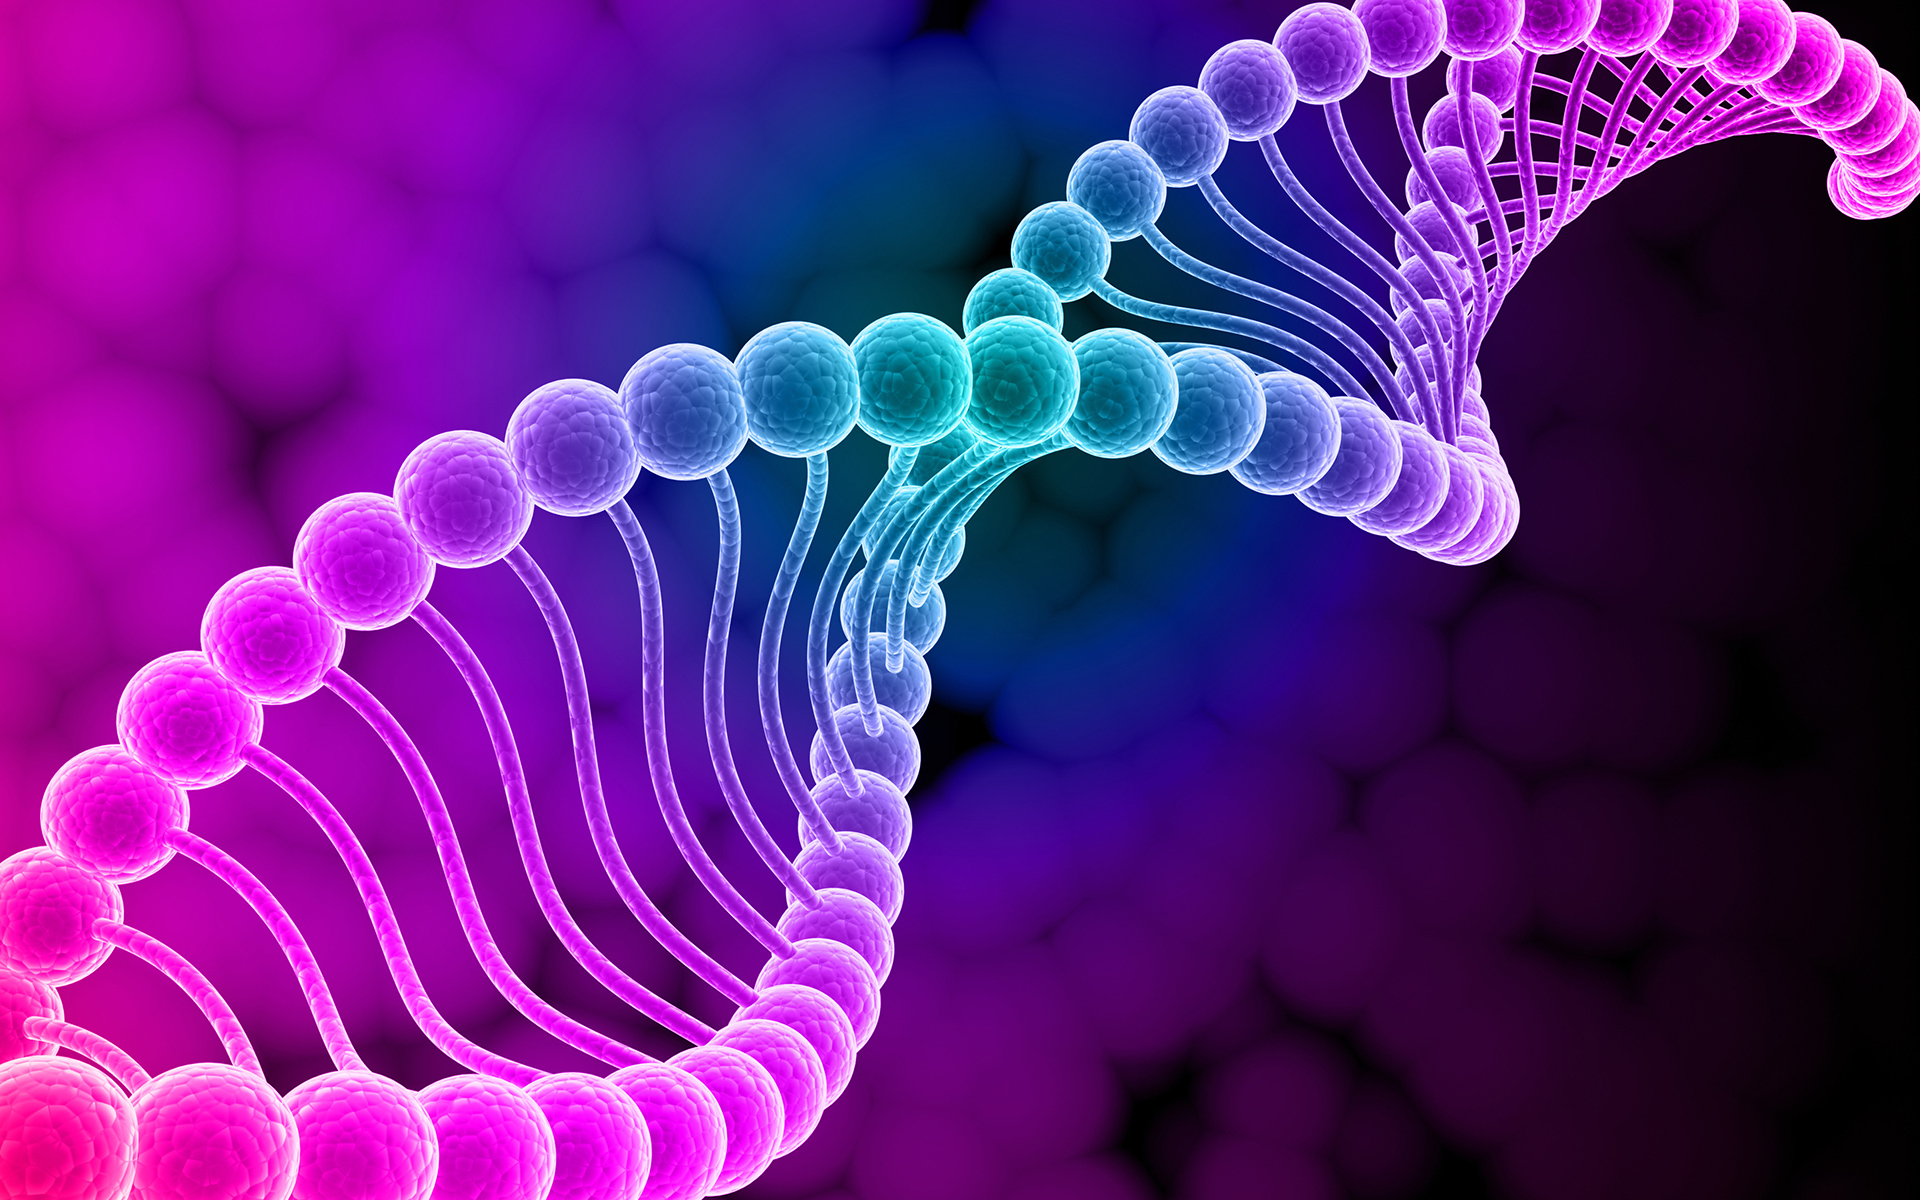 The double helix structure of DNA.